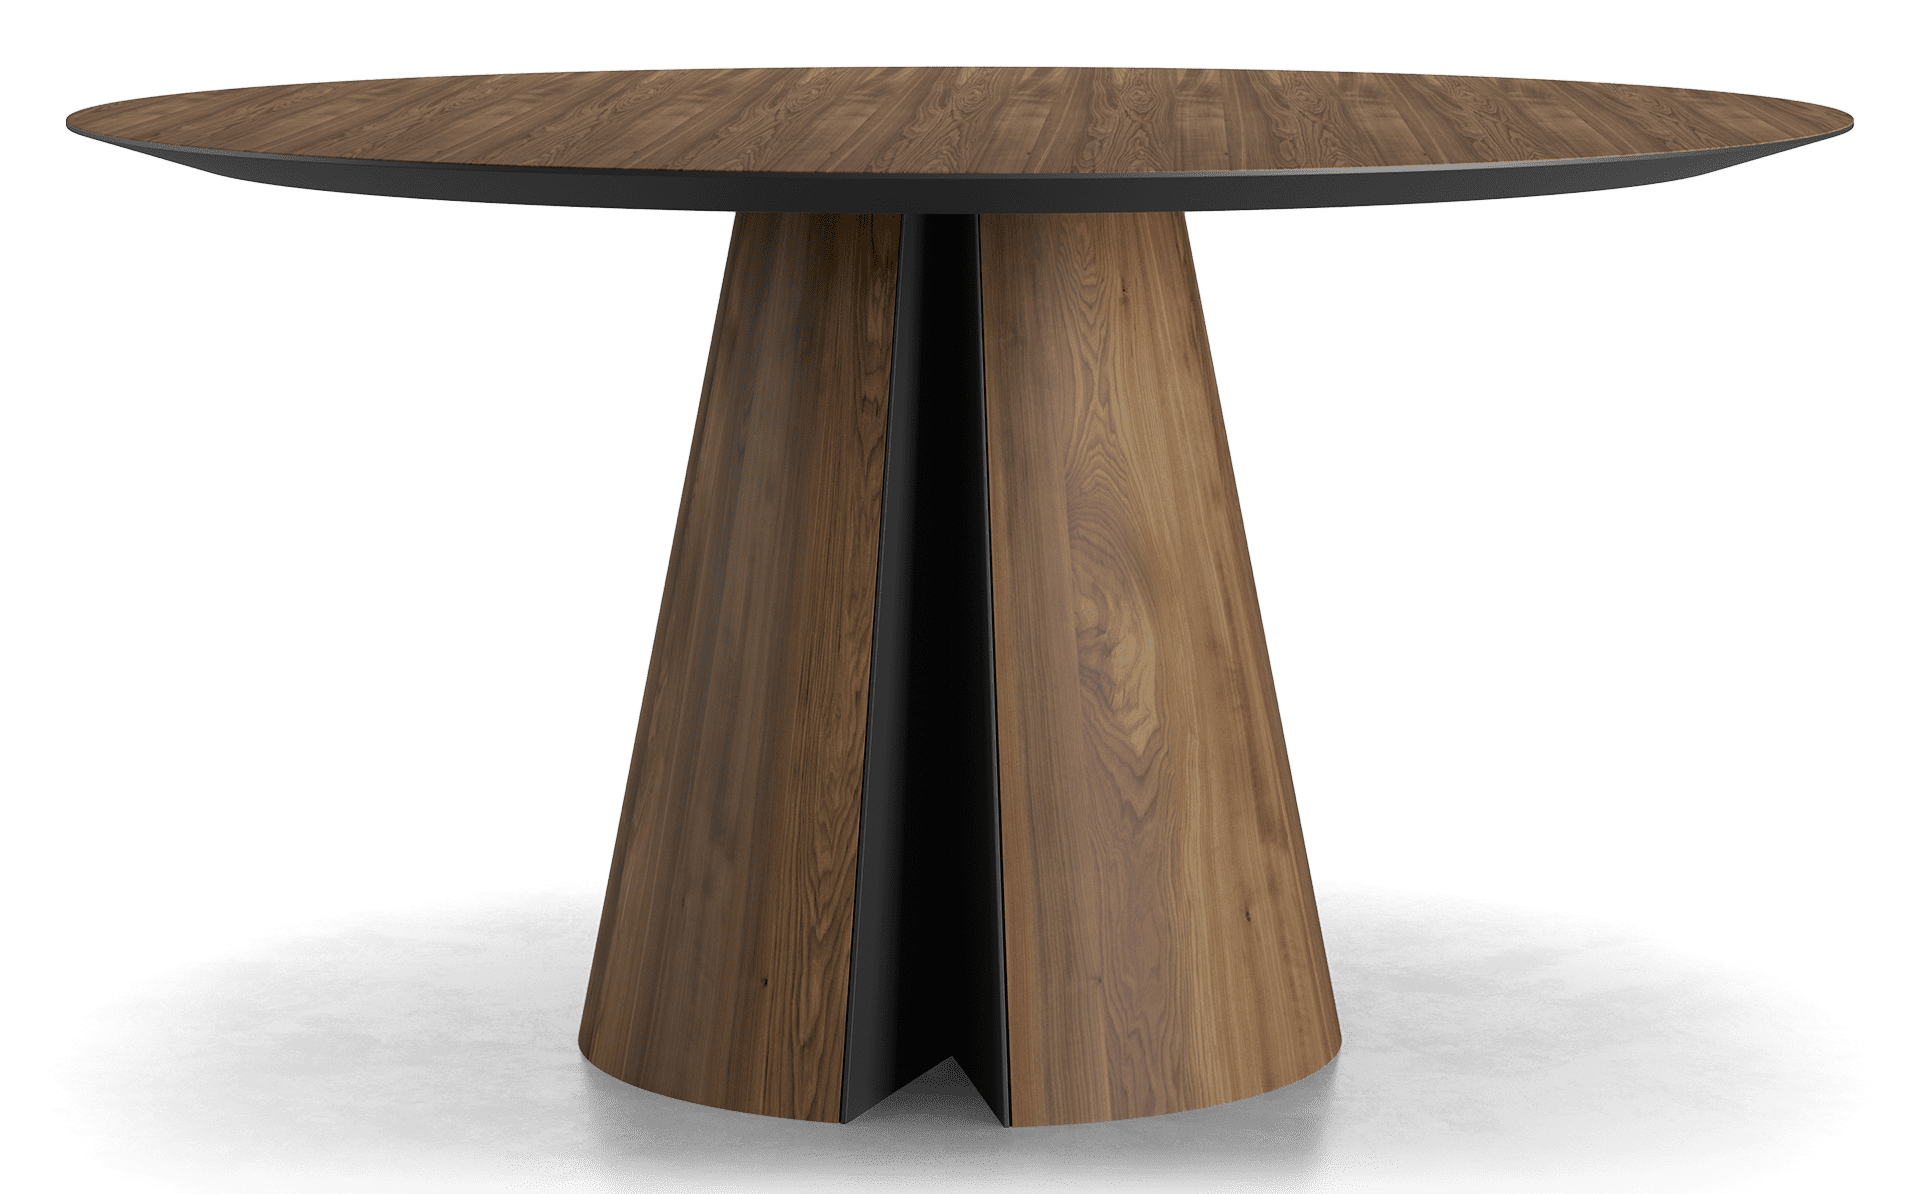 What's the ideal distance between chairs in a dining table?